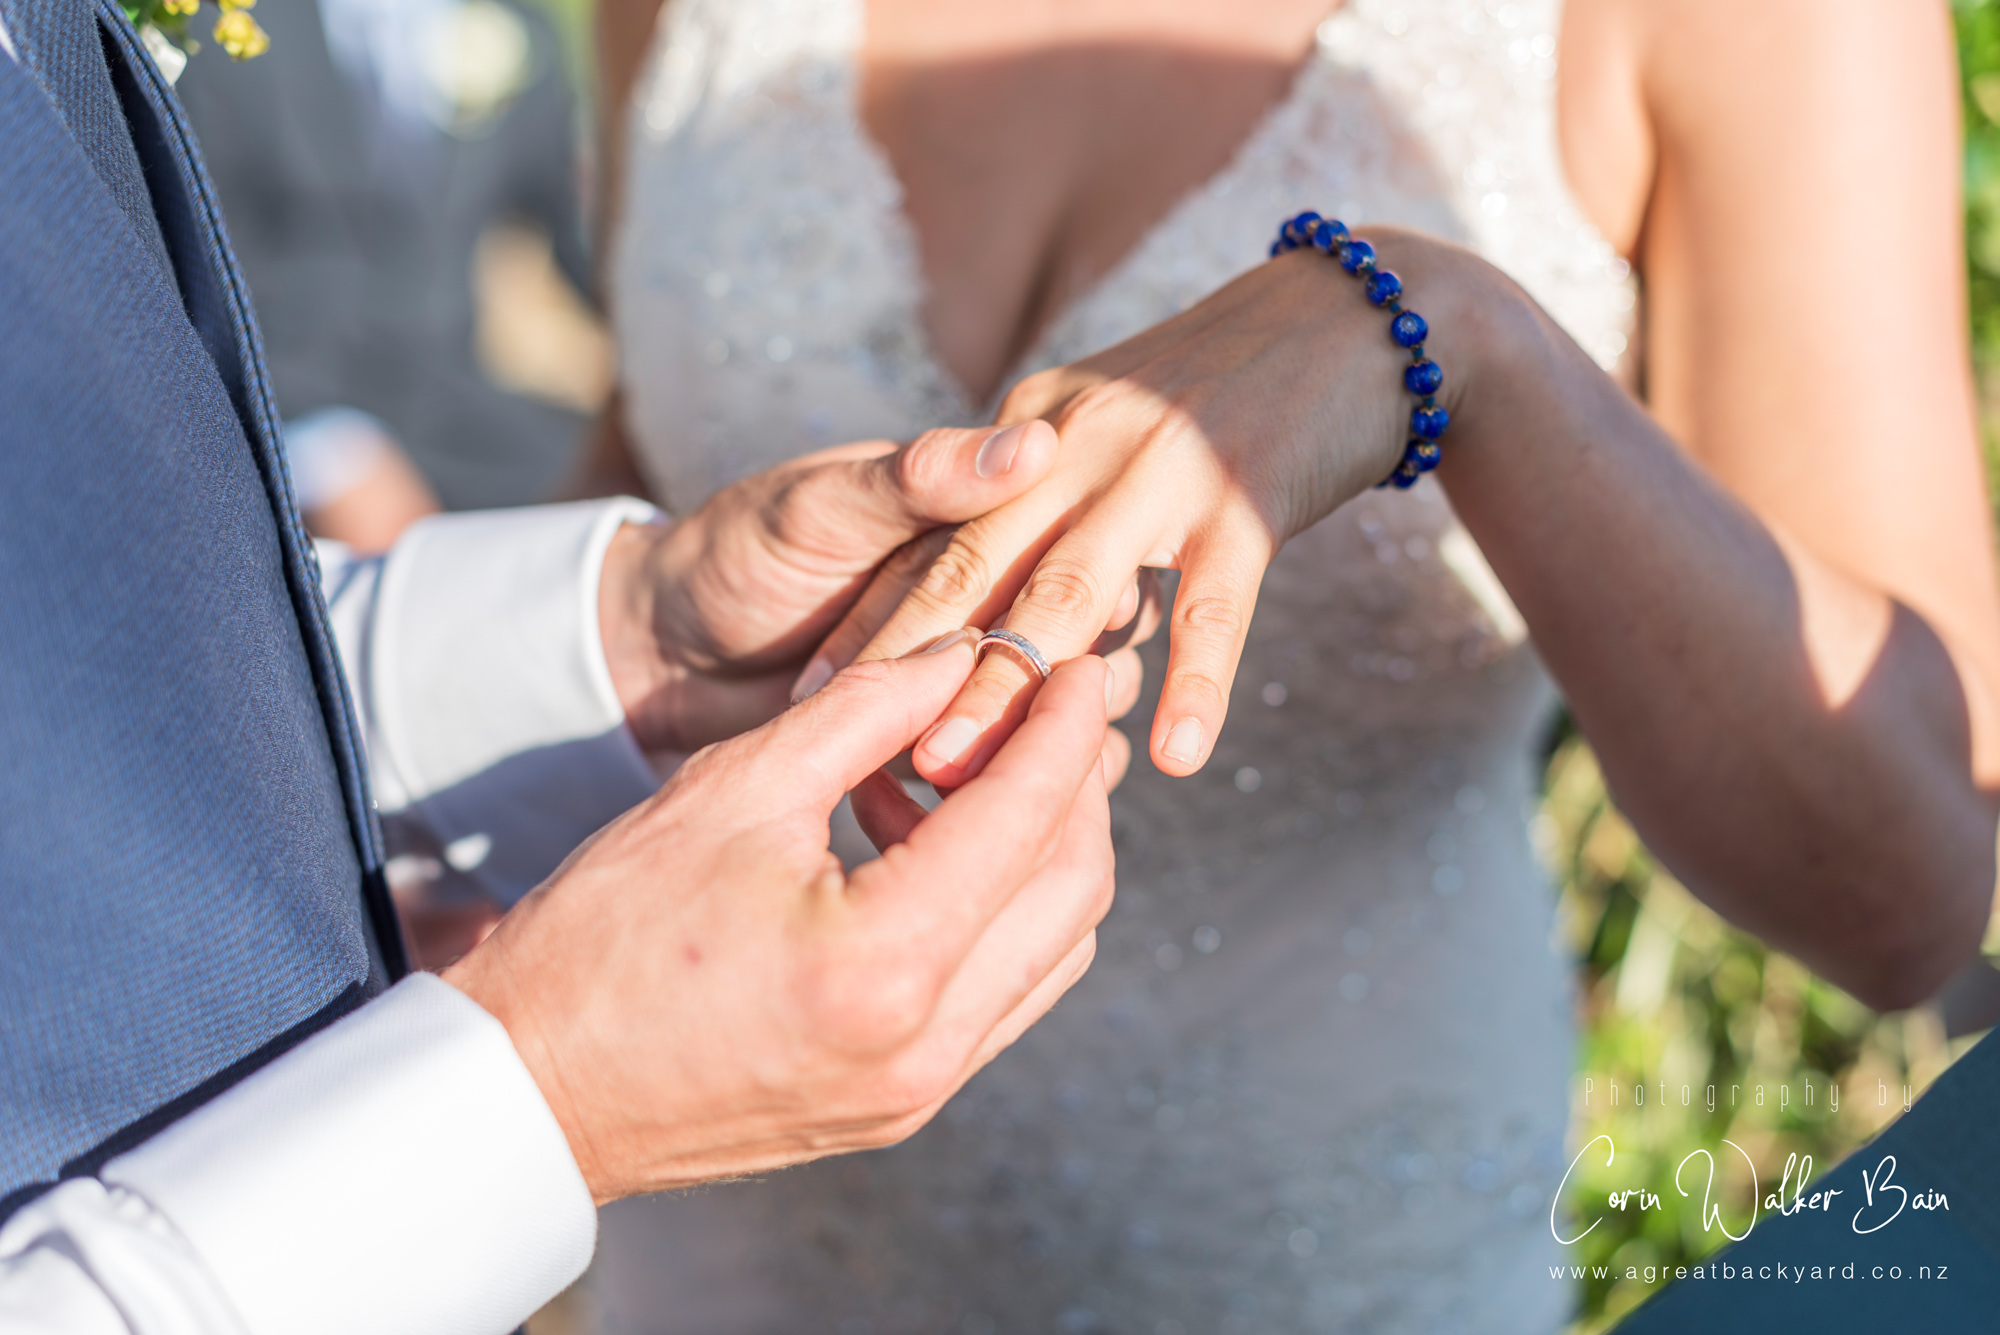 With this ring at Andy and Emma's Waiheke Island wedding by New Zealand wedding photographer Corin Walker Bain of a great backyard